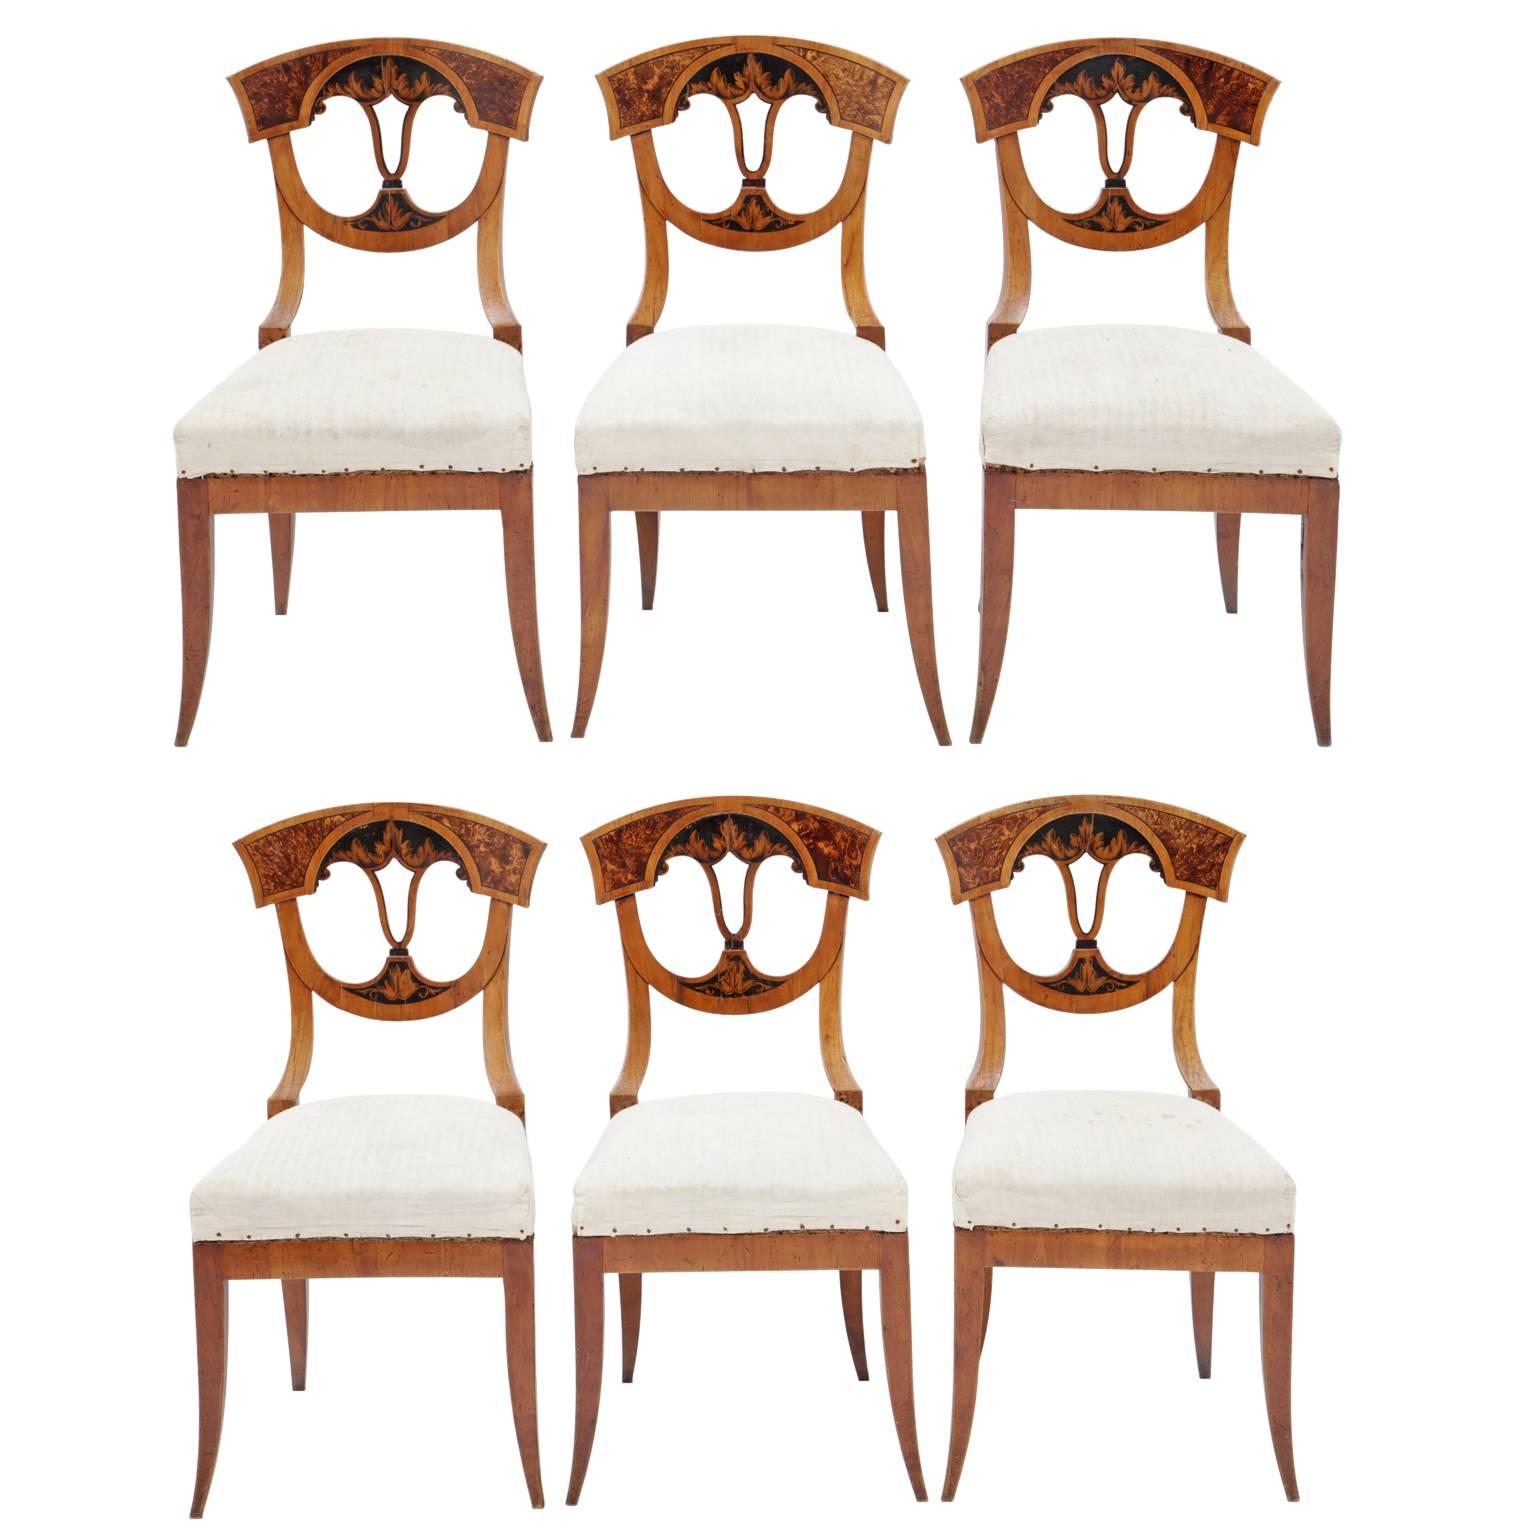 Early 19th Century Neoclassical Dining Chairs, German, Franconia, 1820